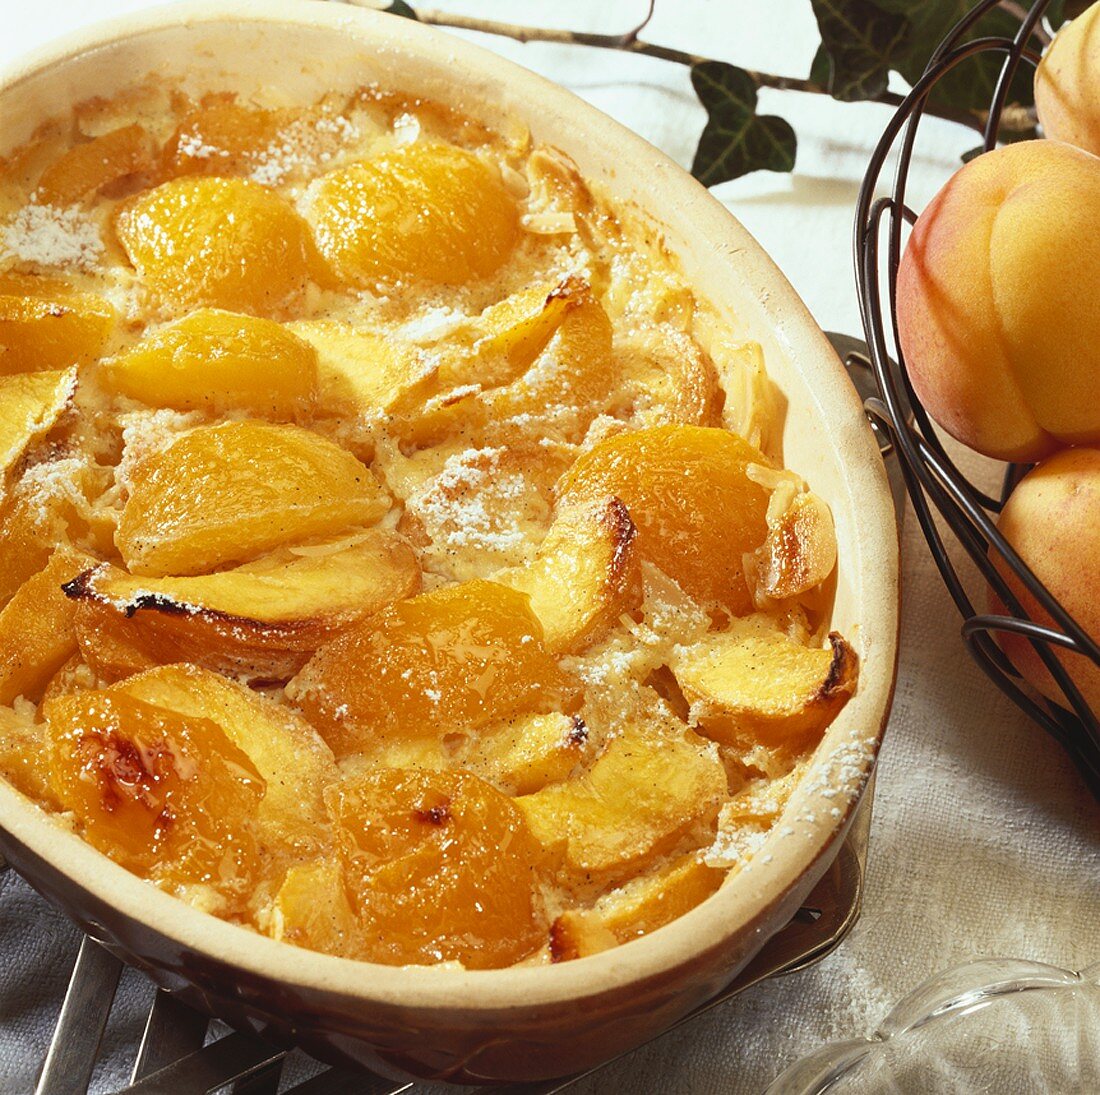 Sweet peach and apricot pudding